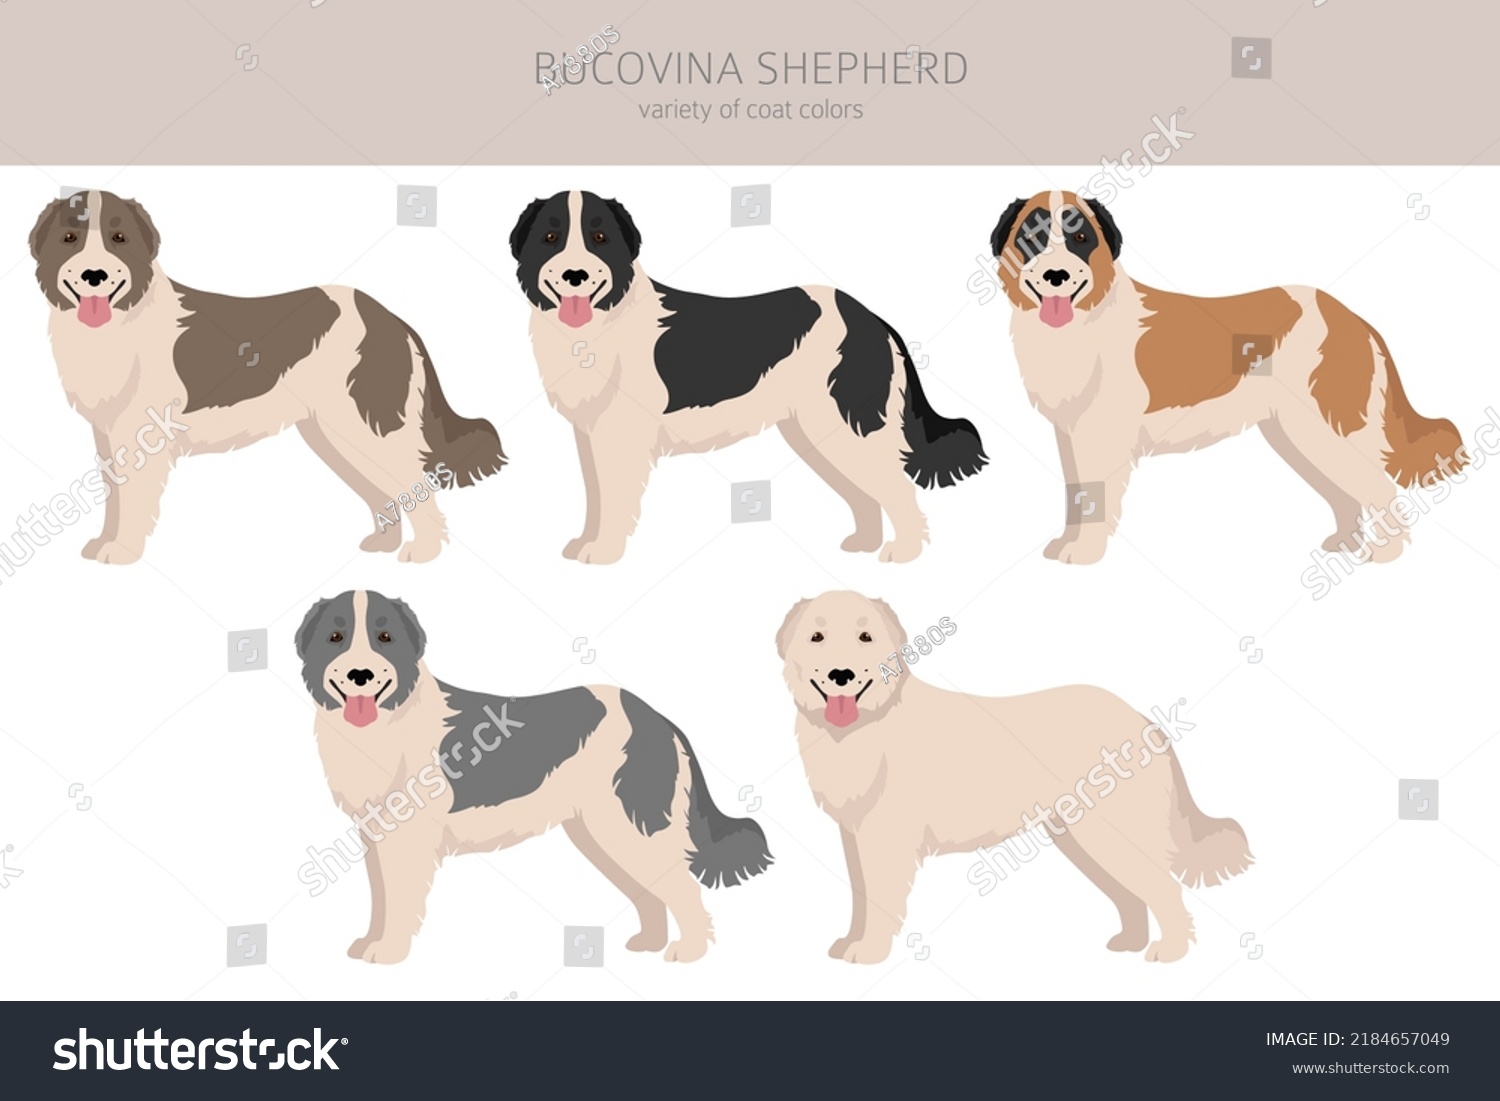 SVG of Bucovina shepherd clipart. Different coat colors and poses set.  Vector illustration svg